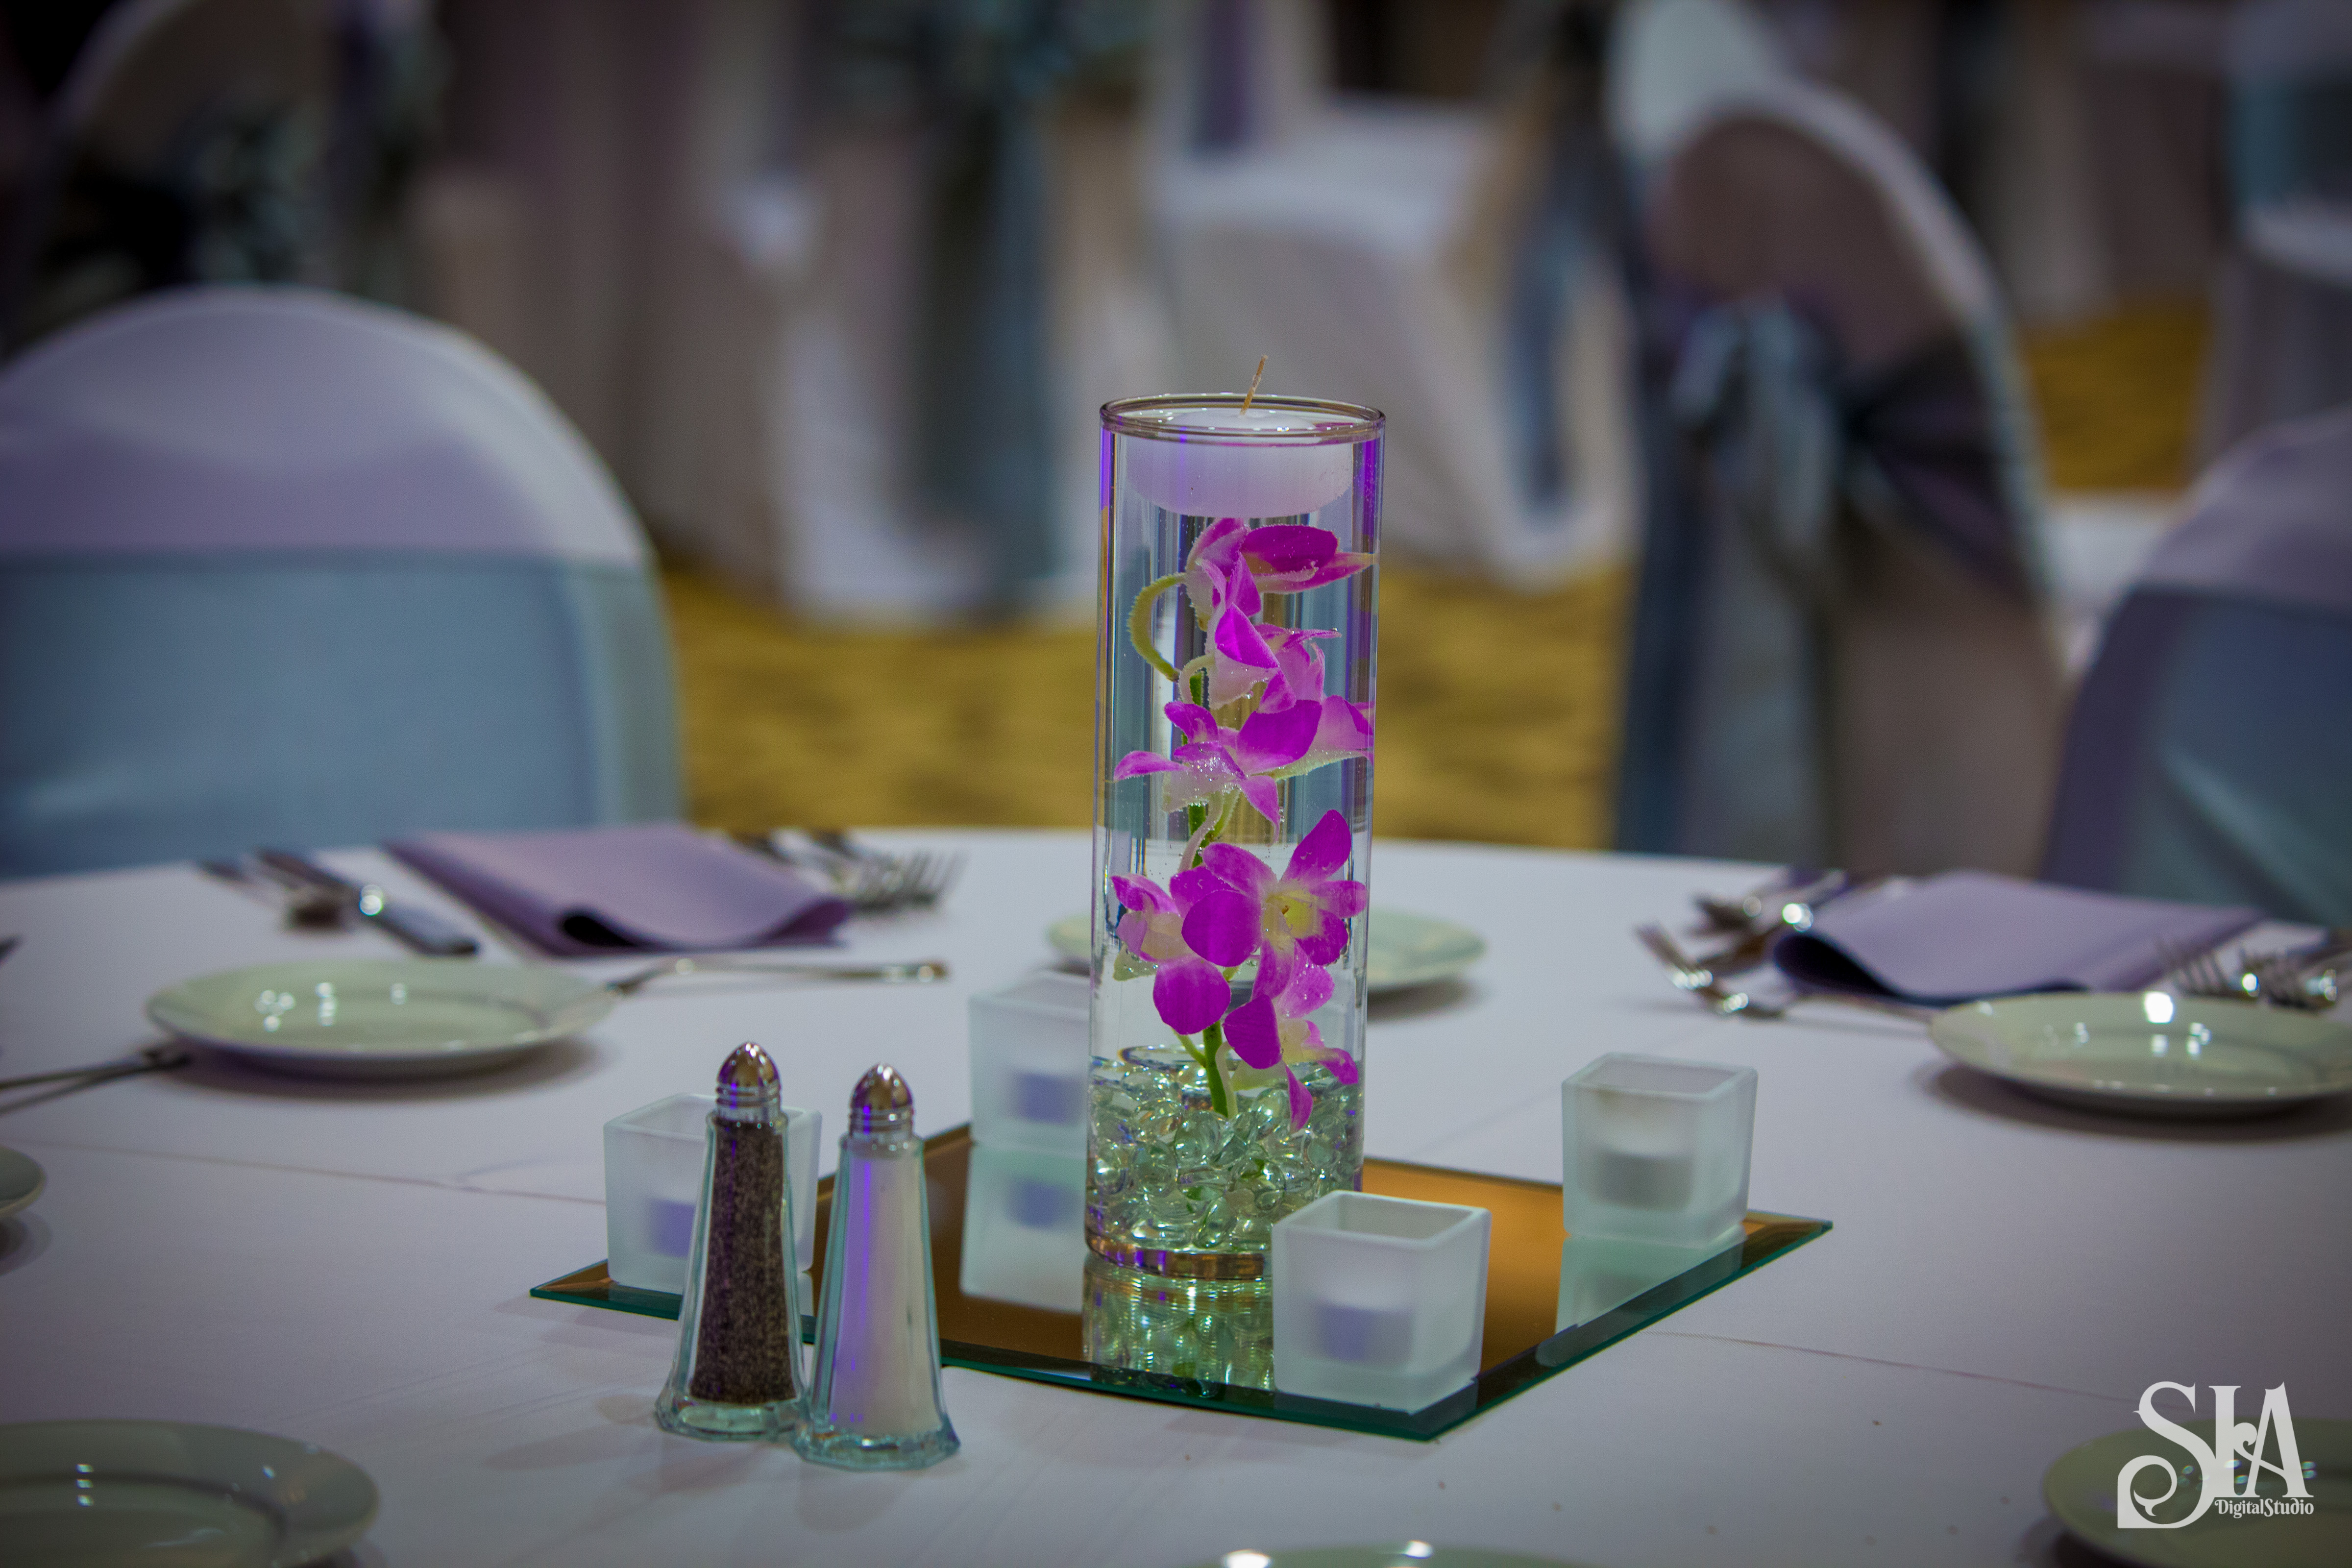 The Art of Wedding Decoration Themes: How to Style a Spectacular Wedding Venue!